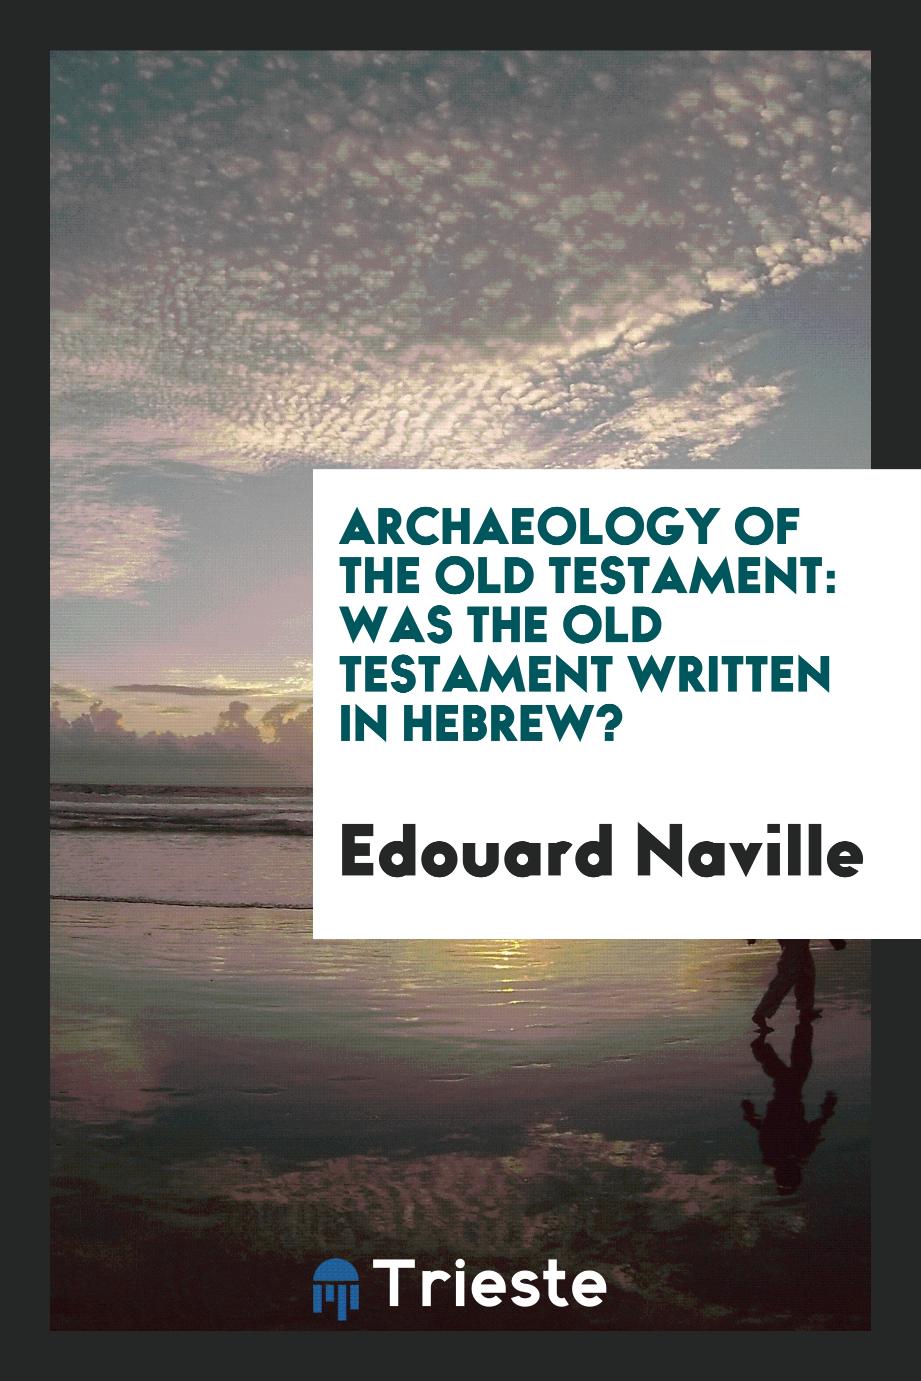 Archaeology of the Old Testament: was the Old Testament written in Hebrew?